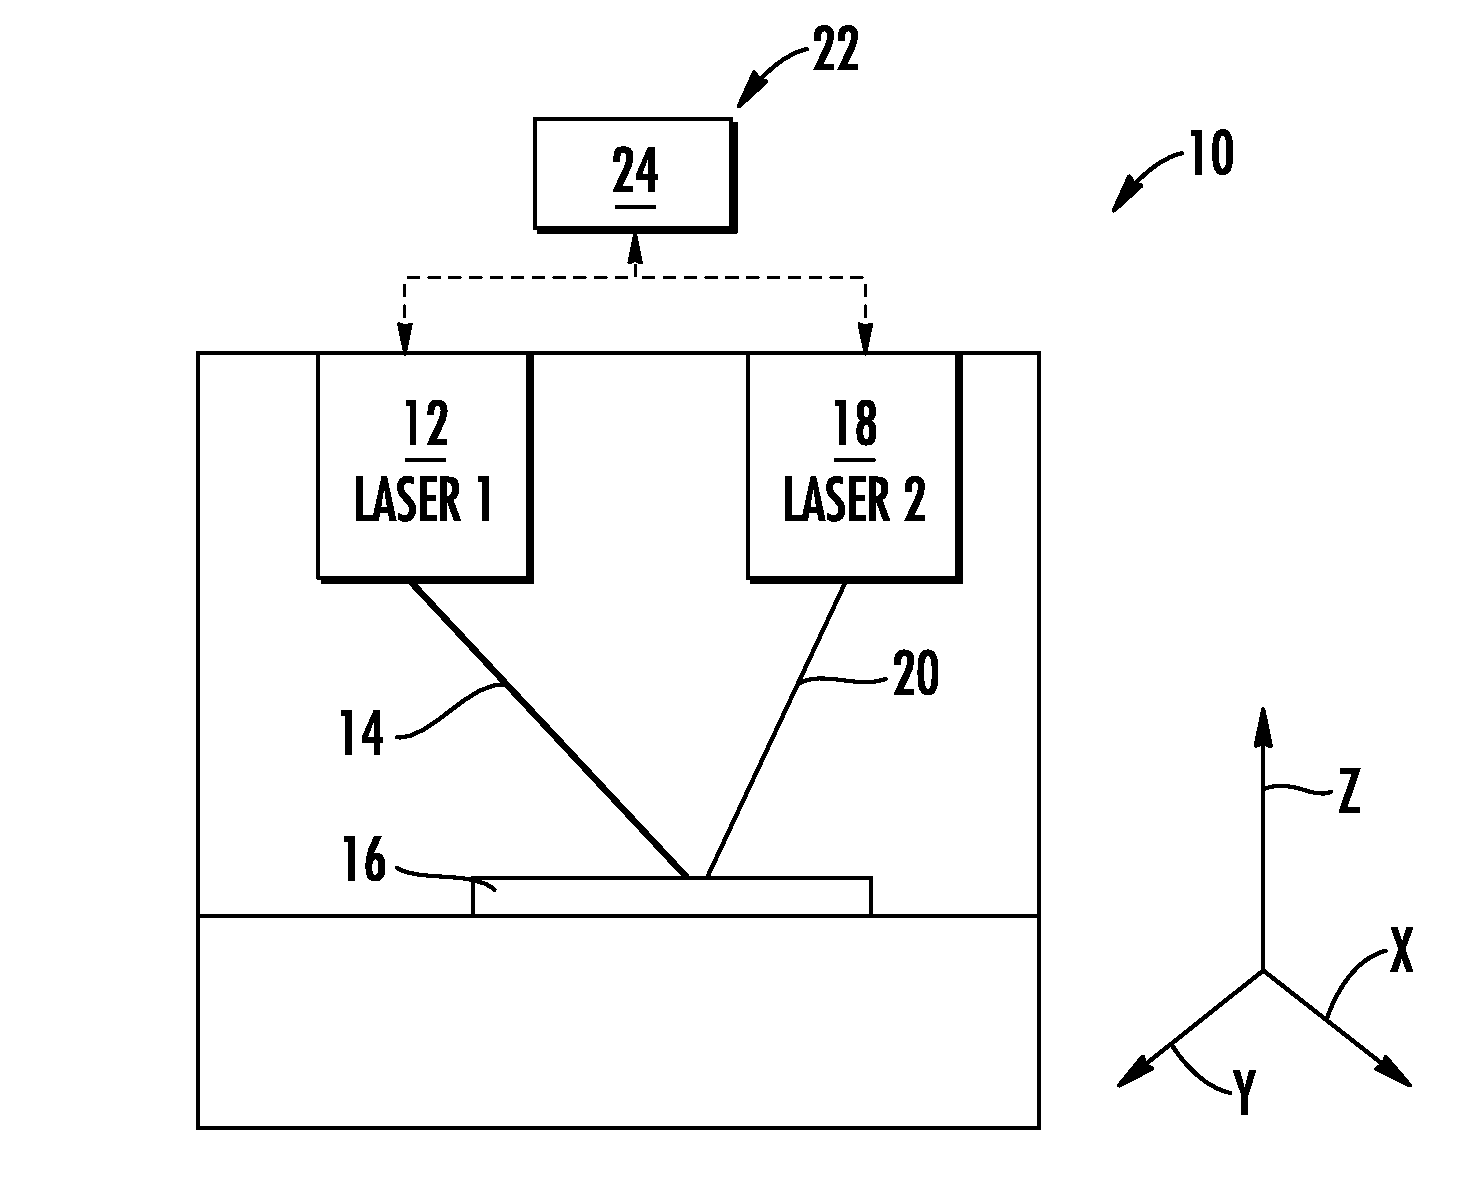 System and method for multi-laser additive manufacturing